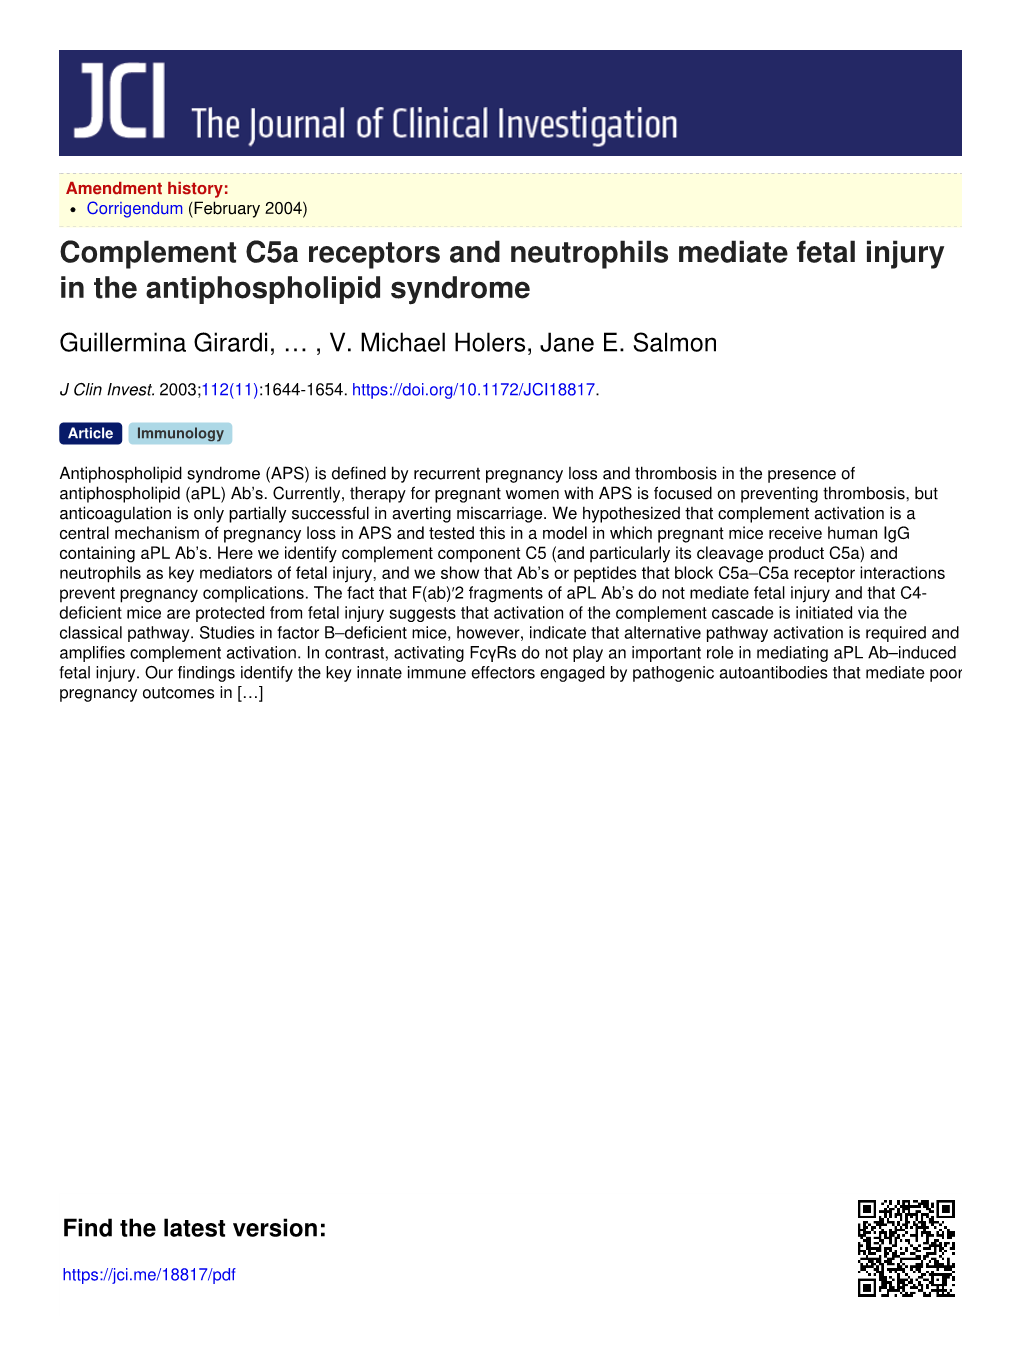 Complement C5a Receptors and Neutrophils Mediate Fetal Injury in the Antiphospholipid Syndrome